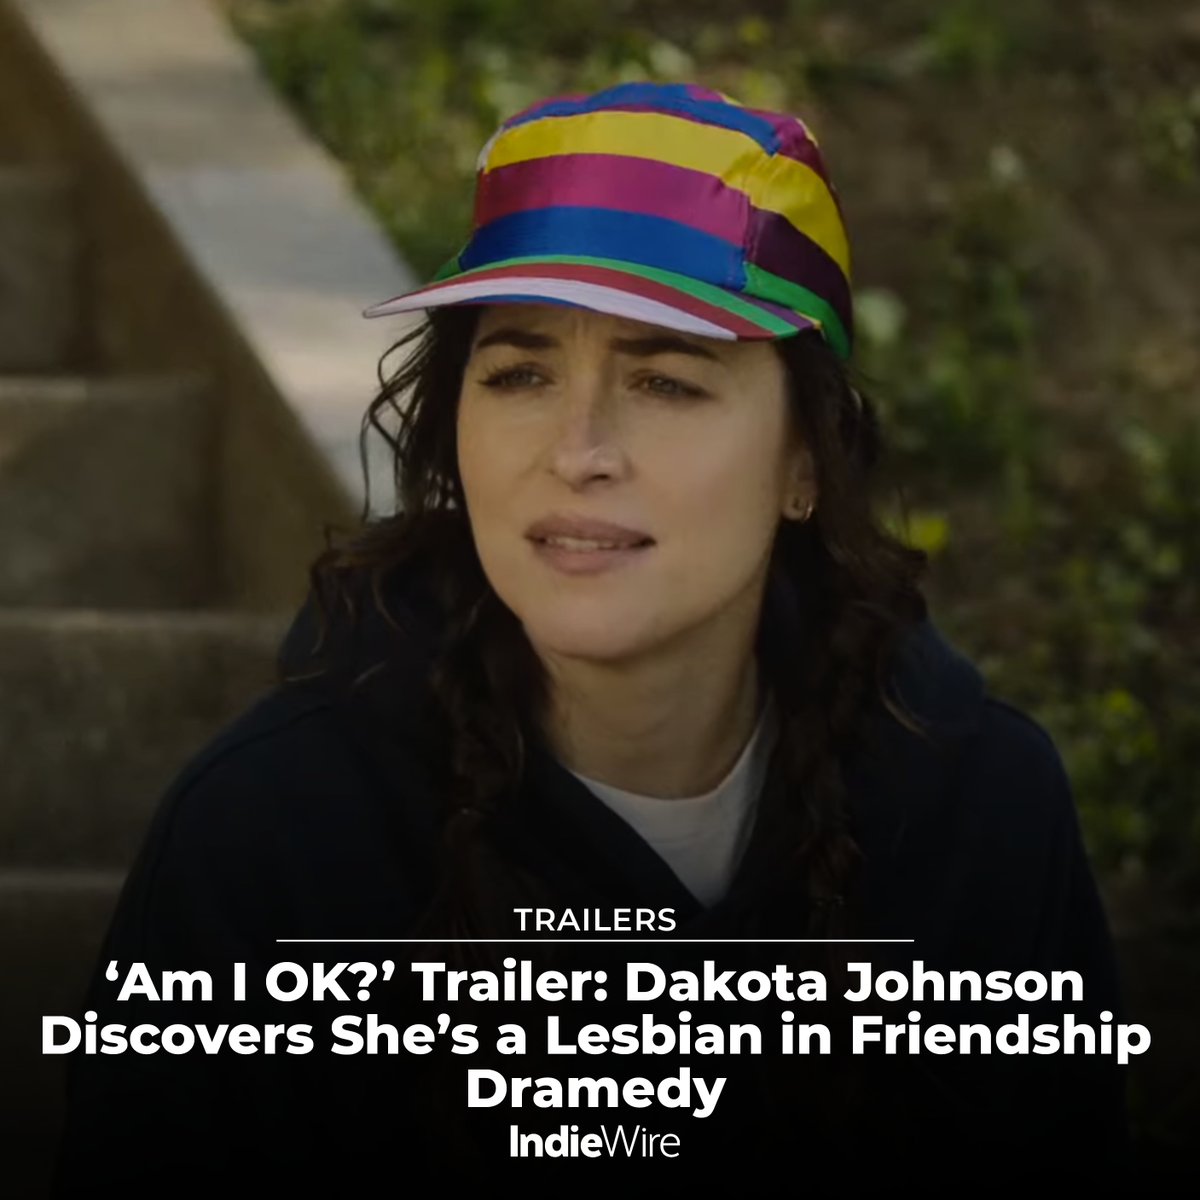 Dakota Johnson is asking herself what we all have at one time or another: “Am I OK?” Ahead of its premiere June 6 on Max, check out the trailer: trib.al/gjRJZmi